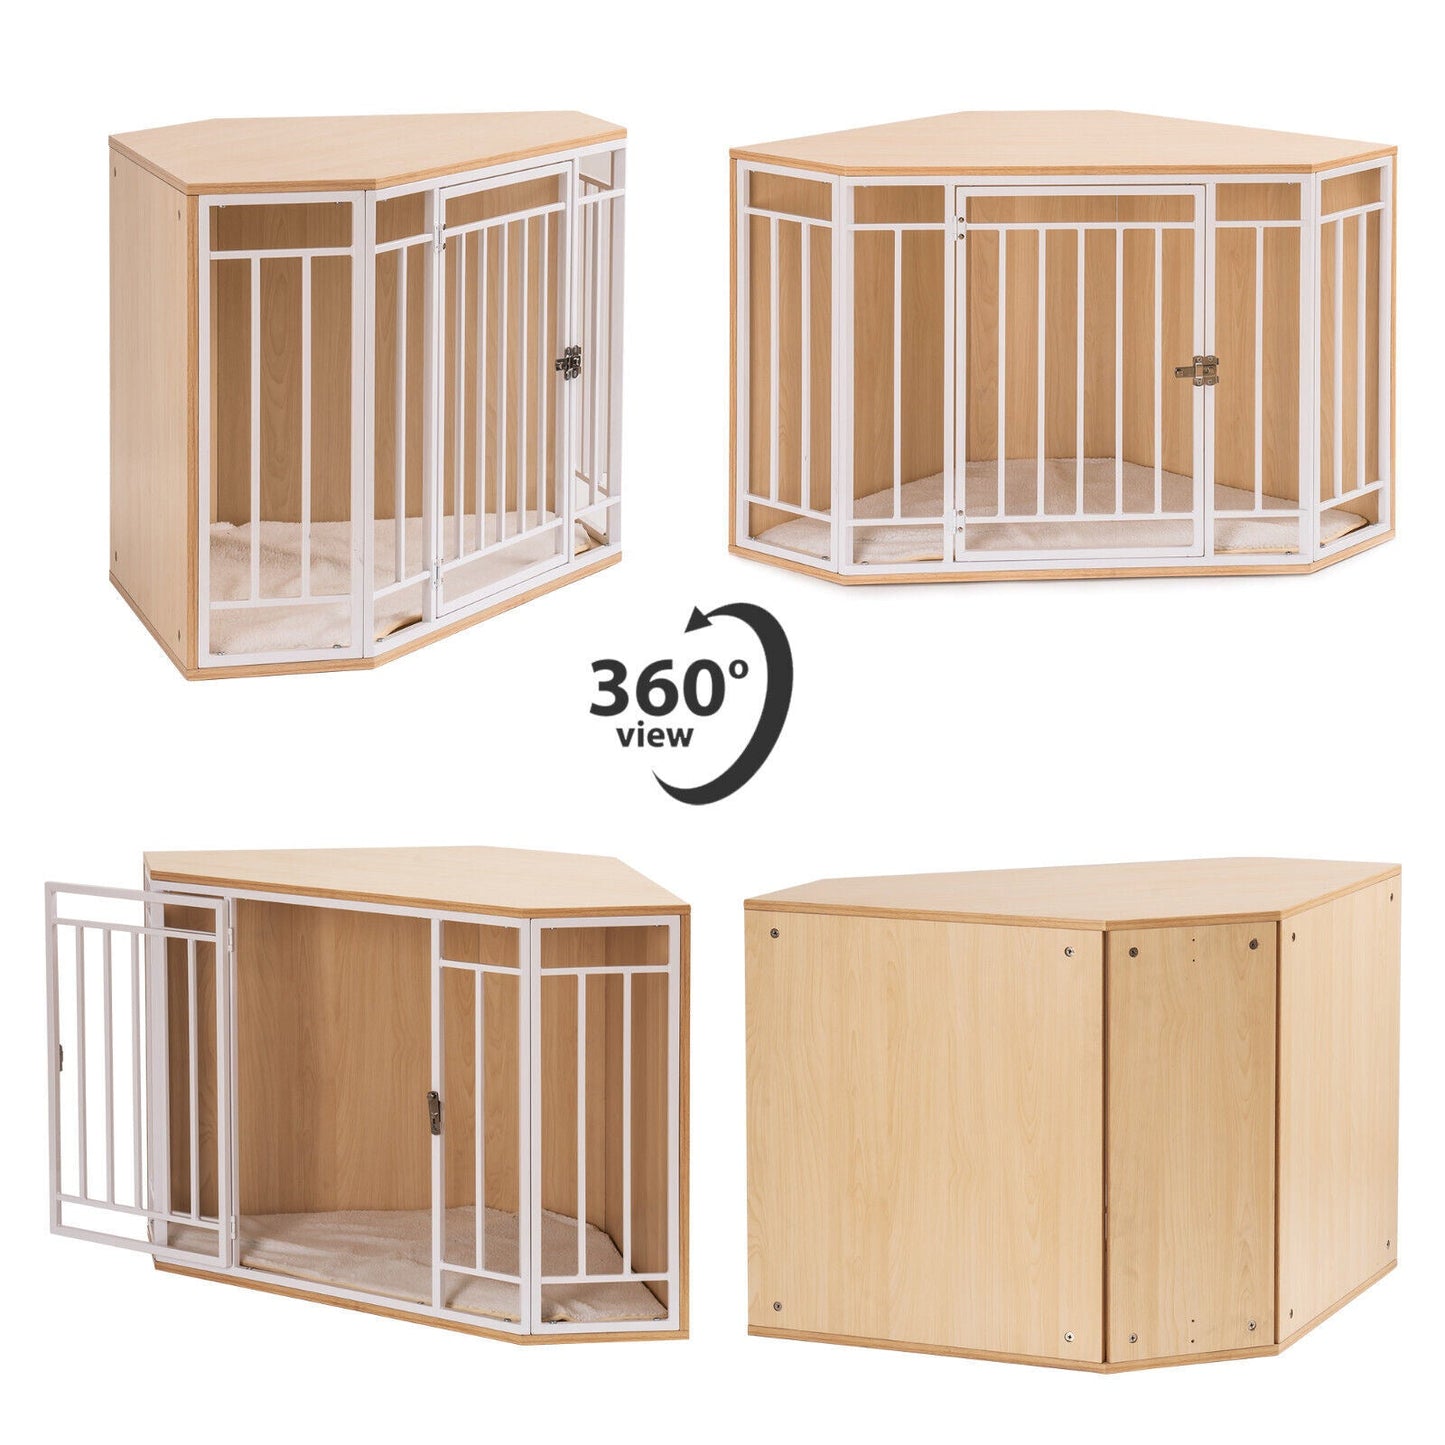 Mewoofun Wooden and Metal Dog House for Small/Medium Dog Crate